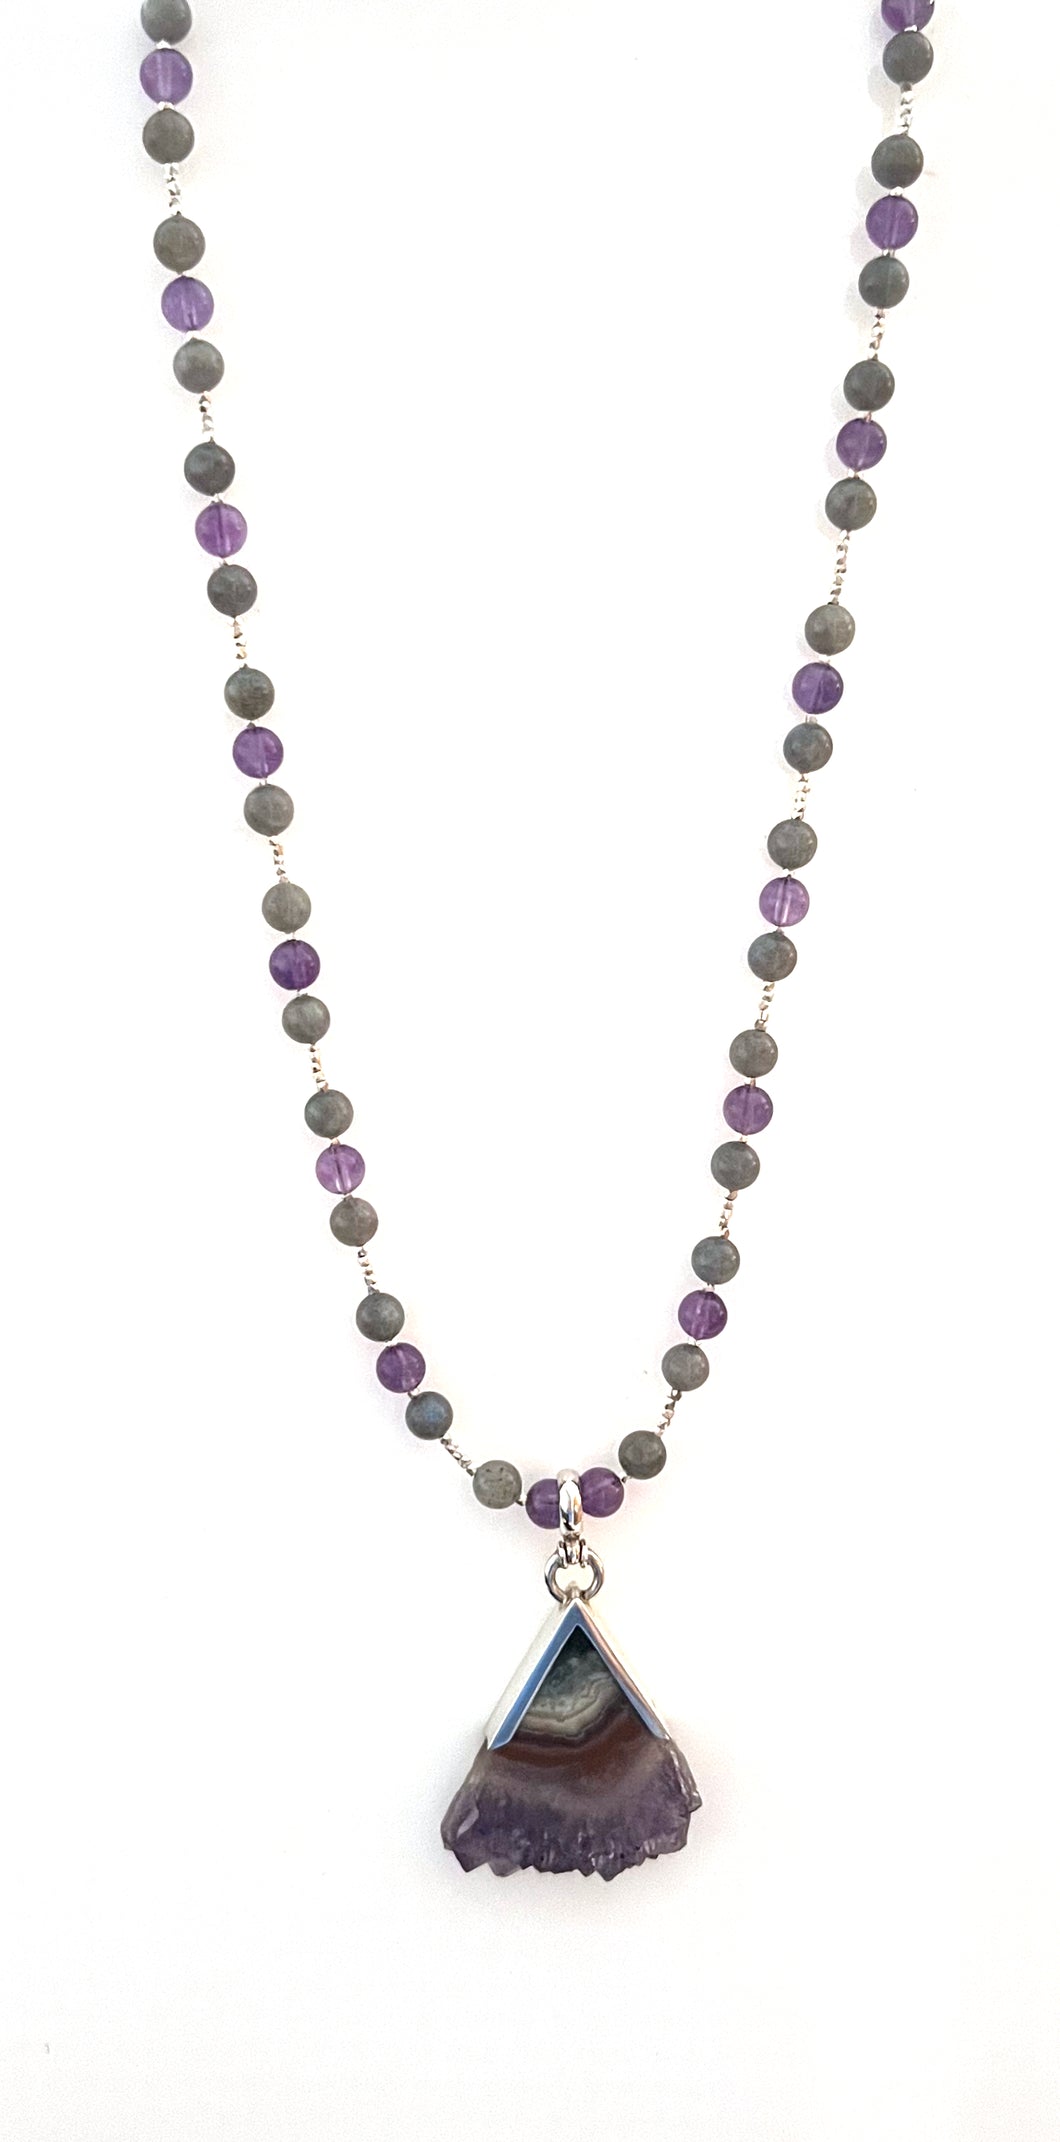 Australian Handmade Purple Necklace with Stalactite Amethyst Pendant Amethyst Labradorite and Sterling Silver